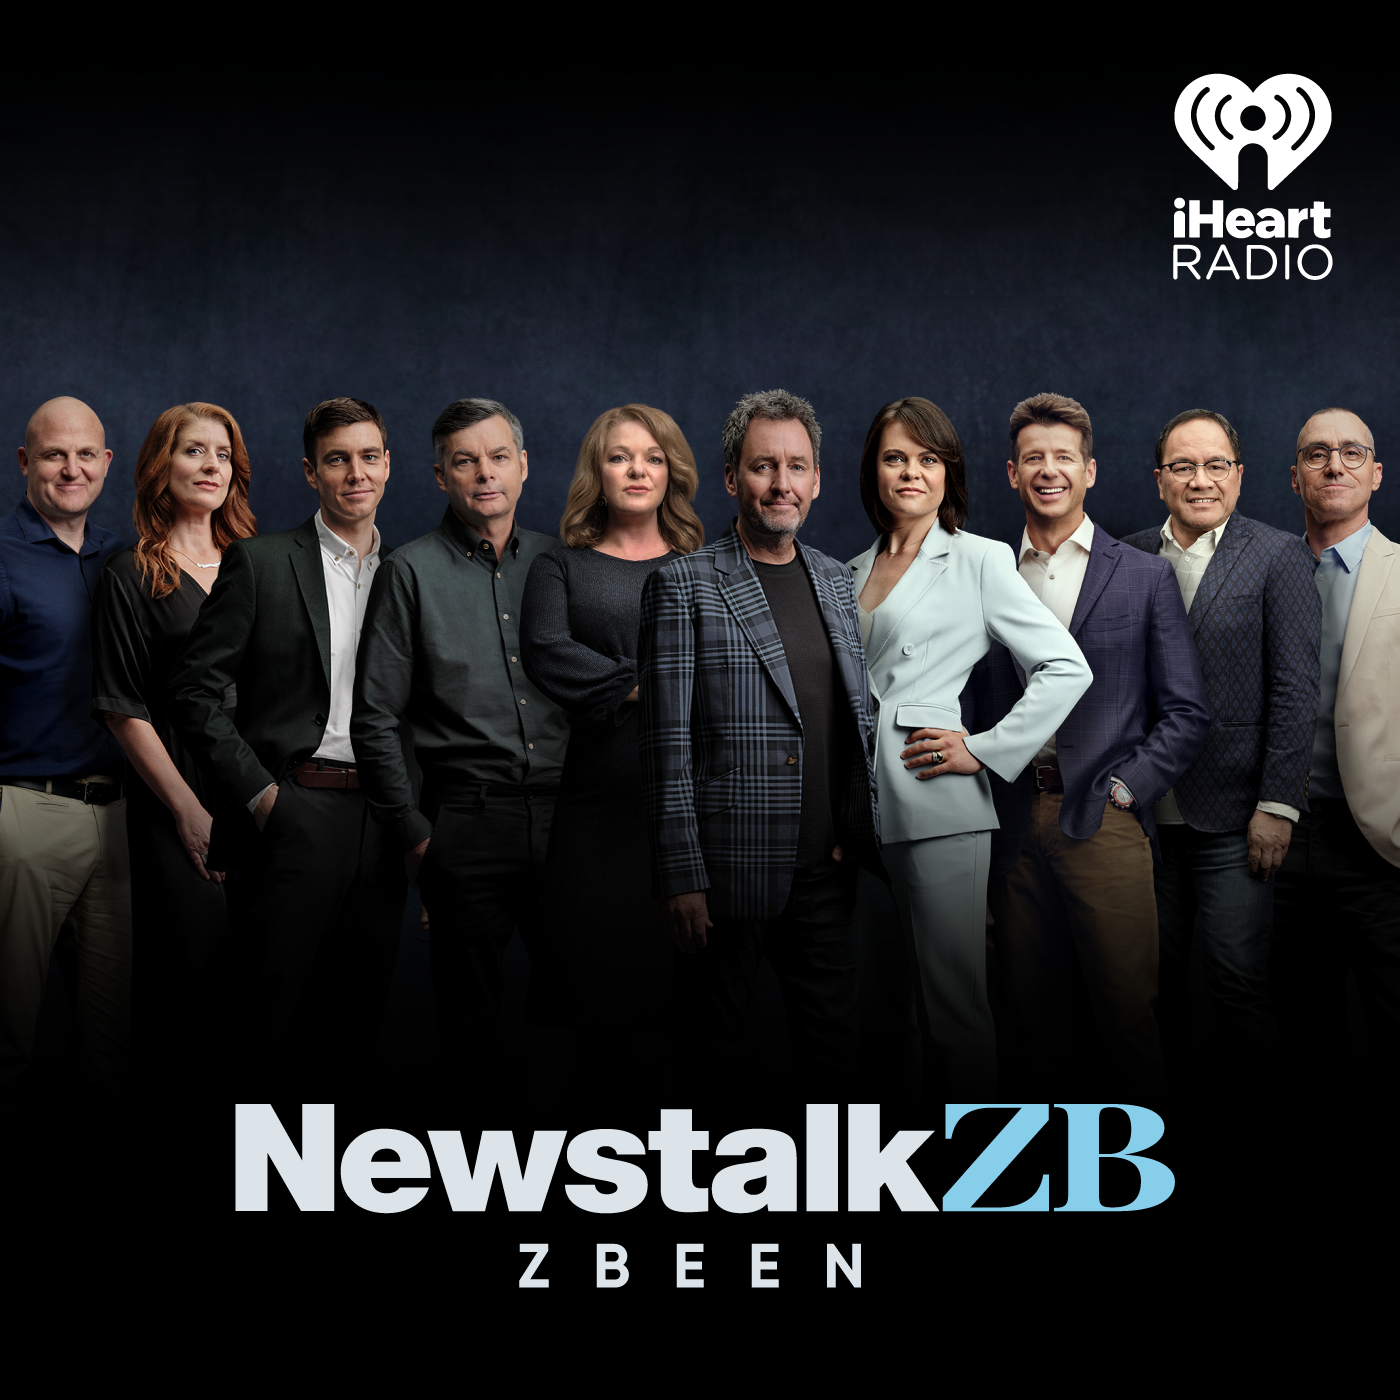 NEWSTALK ZBEEN: It's All About the Plan